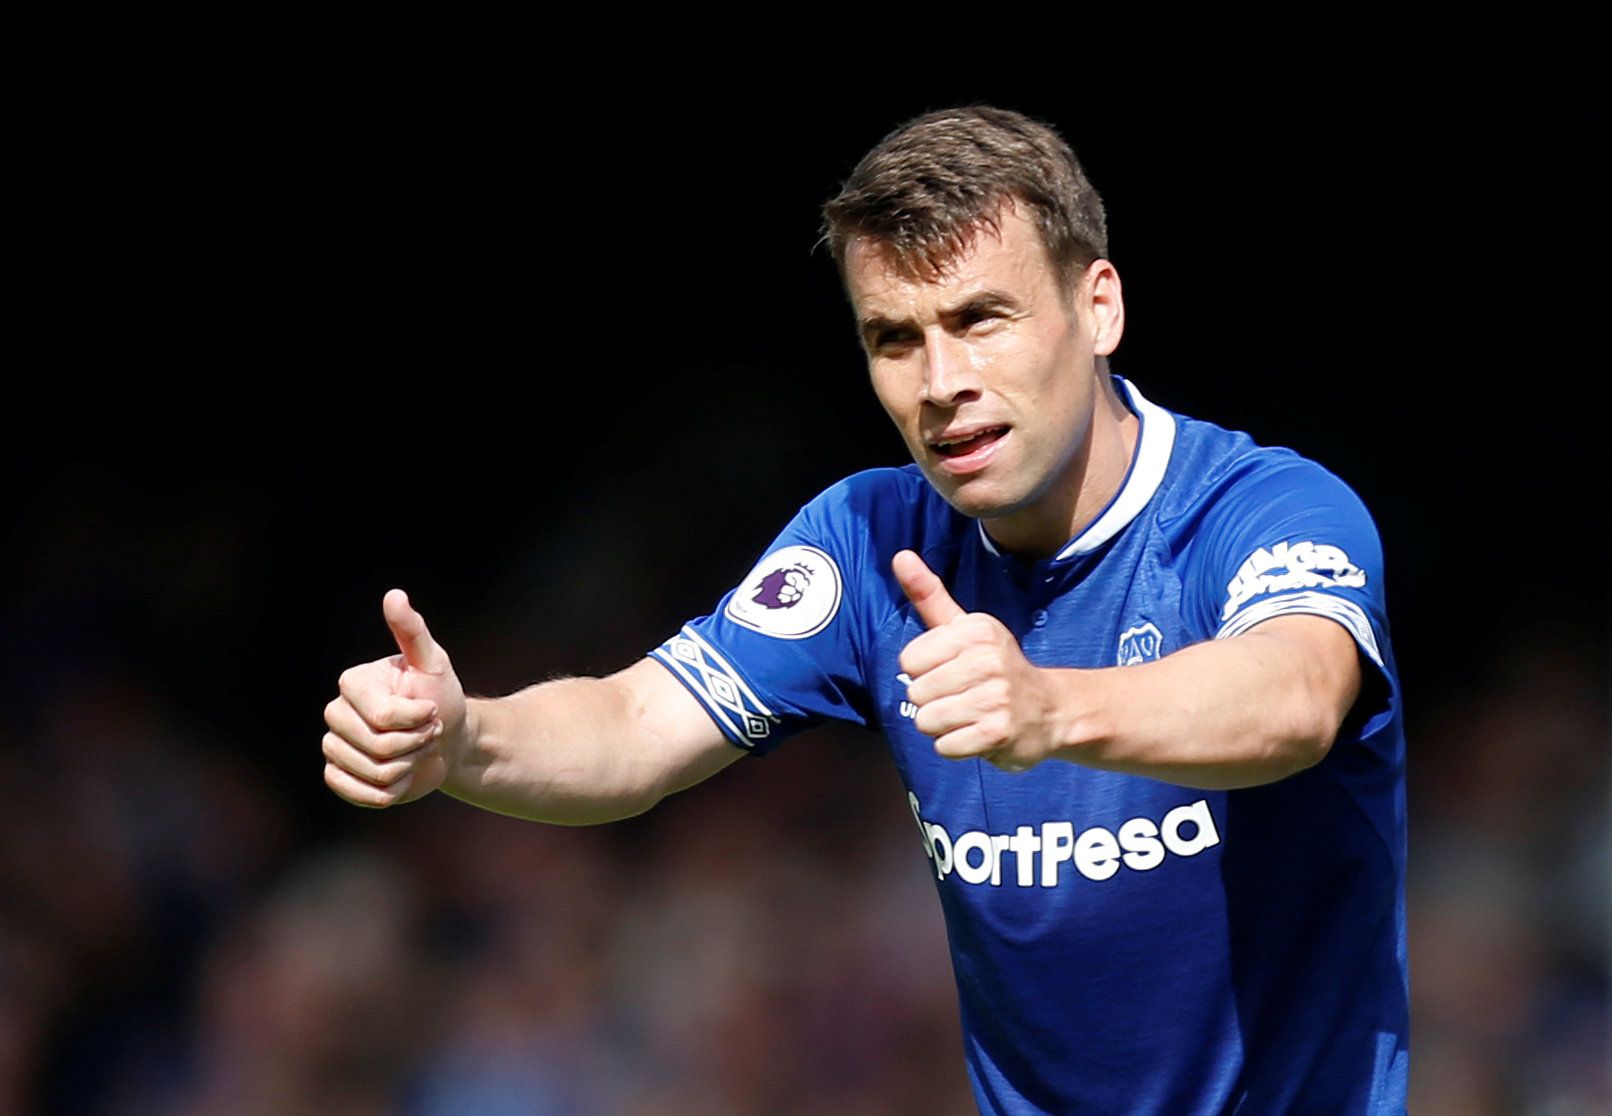 Everton's Seamus Coleman gestures a thumbs up during a pre-season match with Valencia